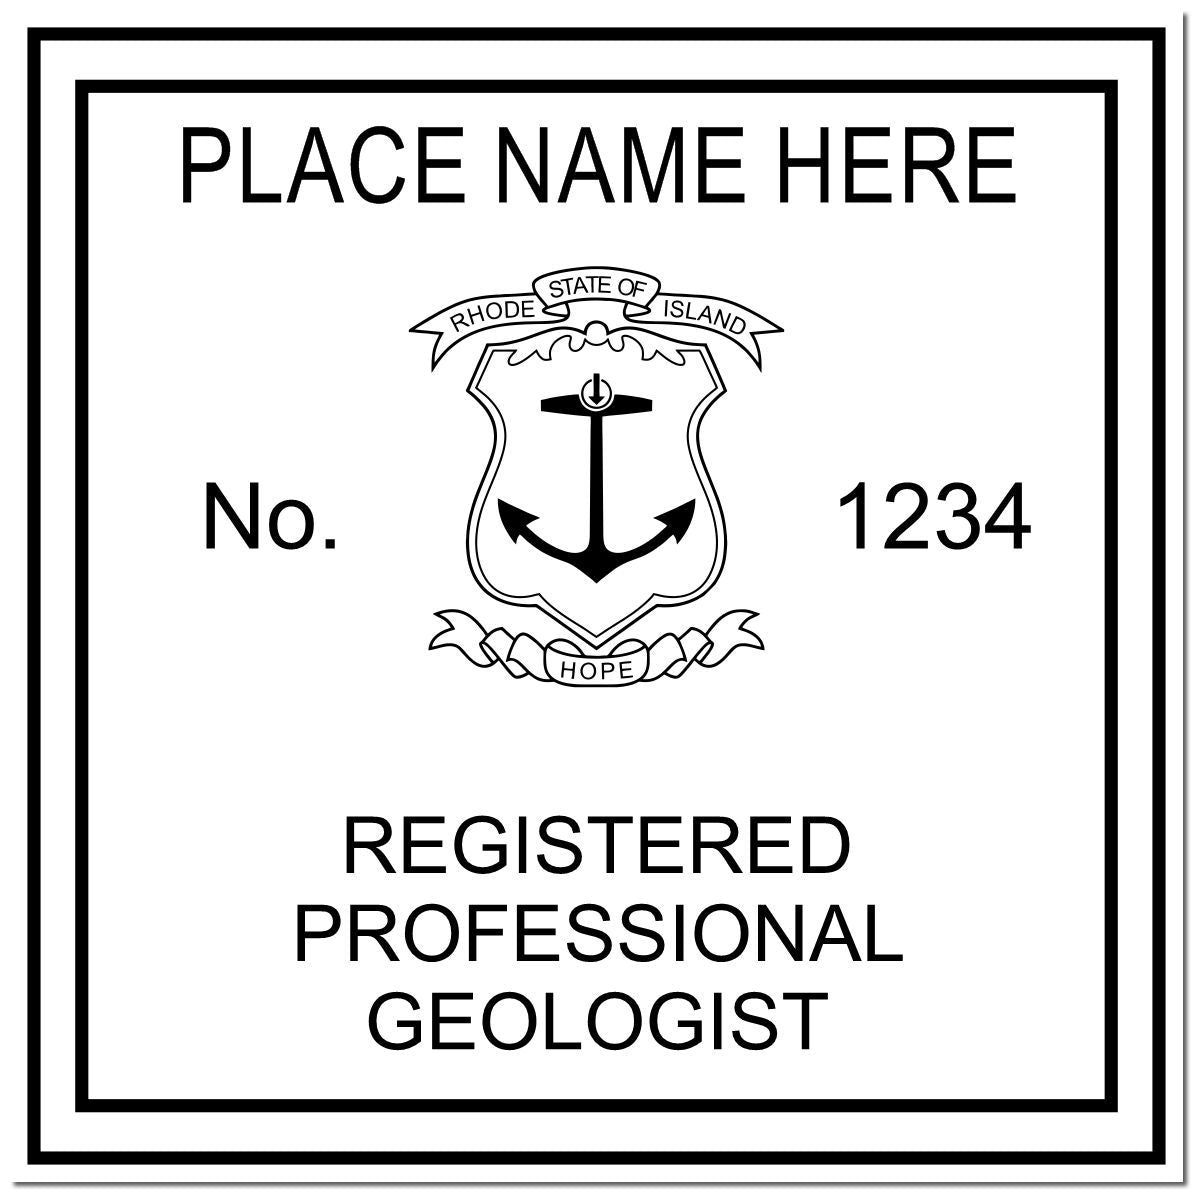 This paper is stamped with a sample imprint of the Rhode Island Professional Geologist Seal Stamp, signifying its quality and reliability.